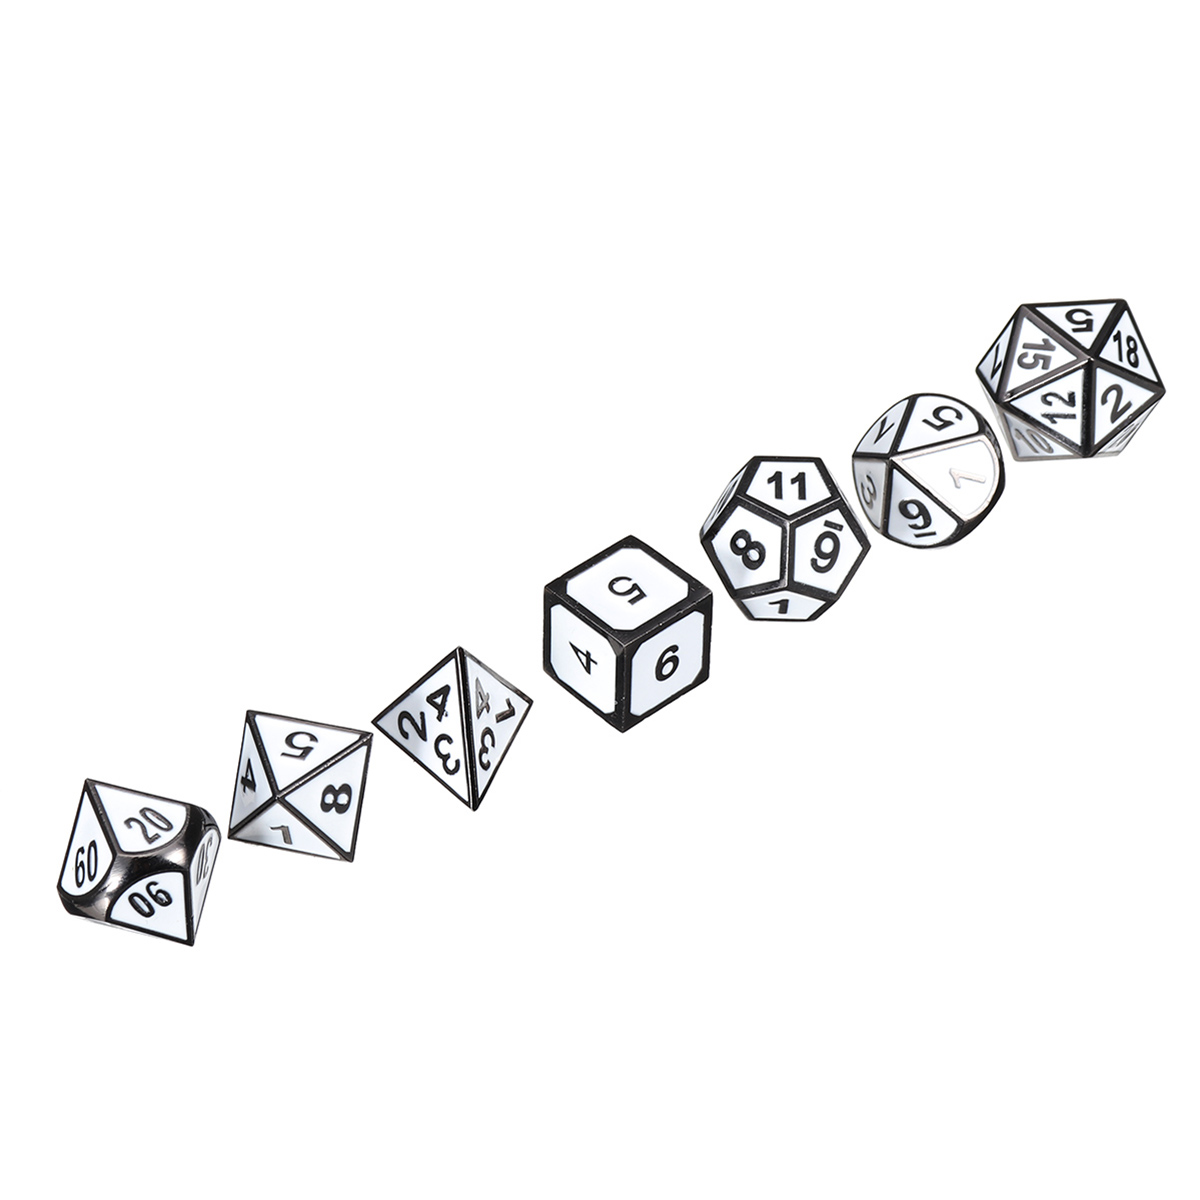 7-Pcs-Multisided-Dice-Heavy-Metal-Polyhedral-Dice-Set-Role-Playing-Games-Dices-with-Bag-1263009-4